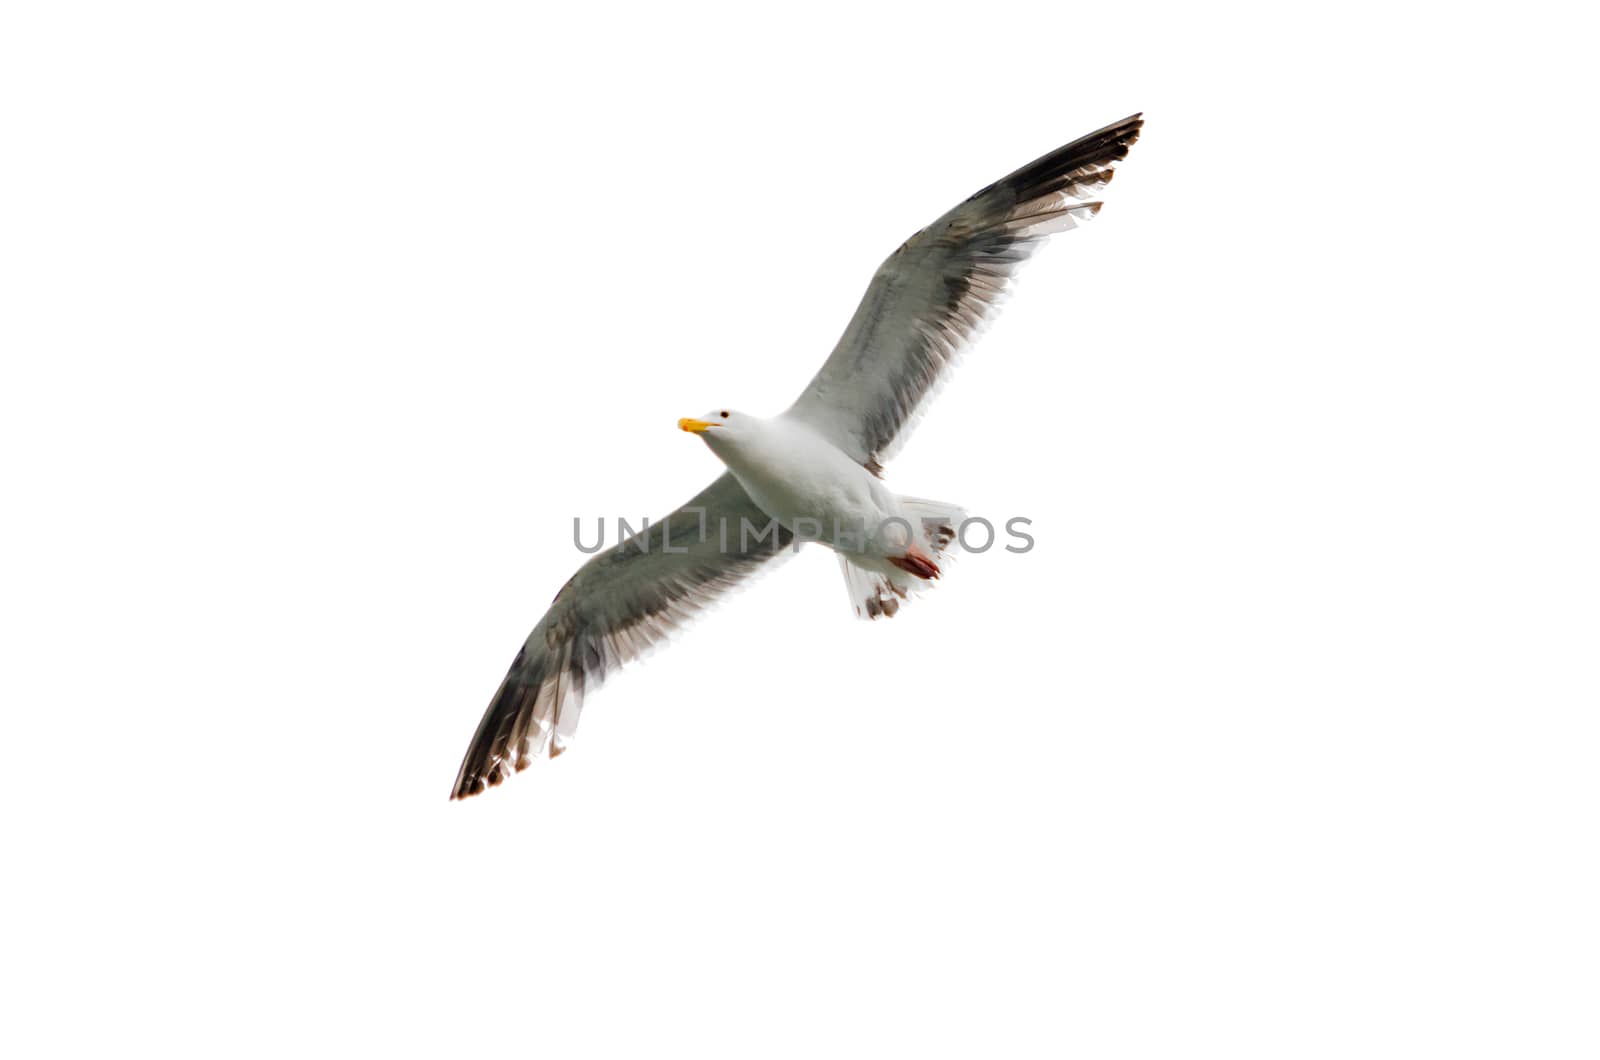 Flying seagull with wings spread open against a white background